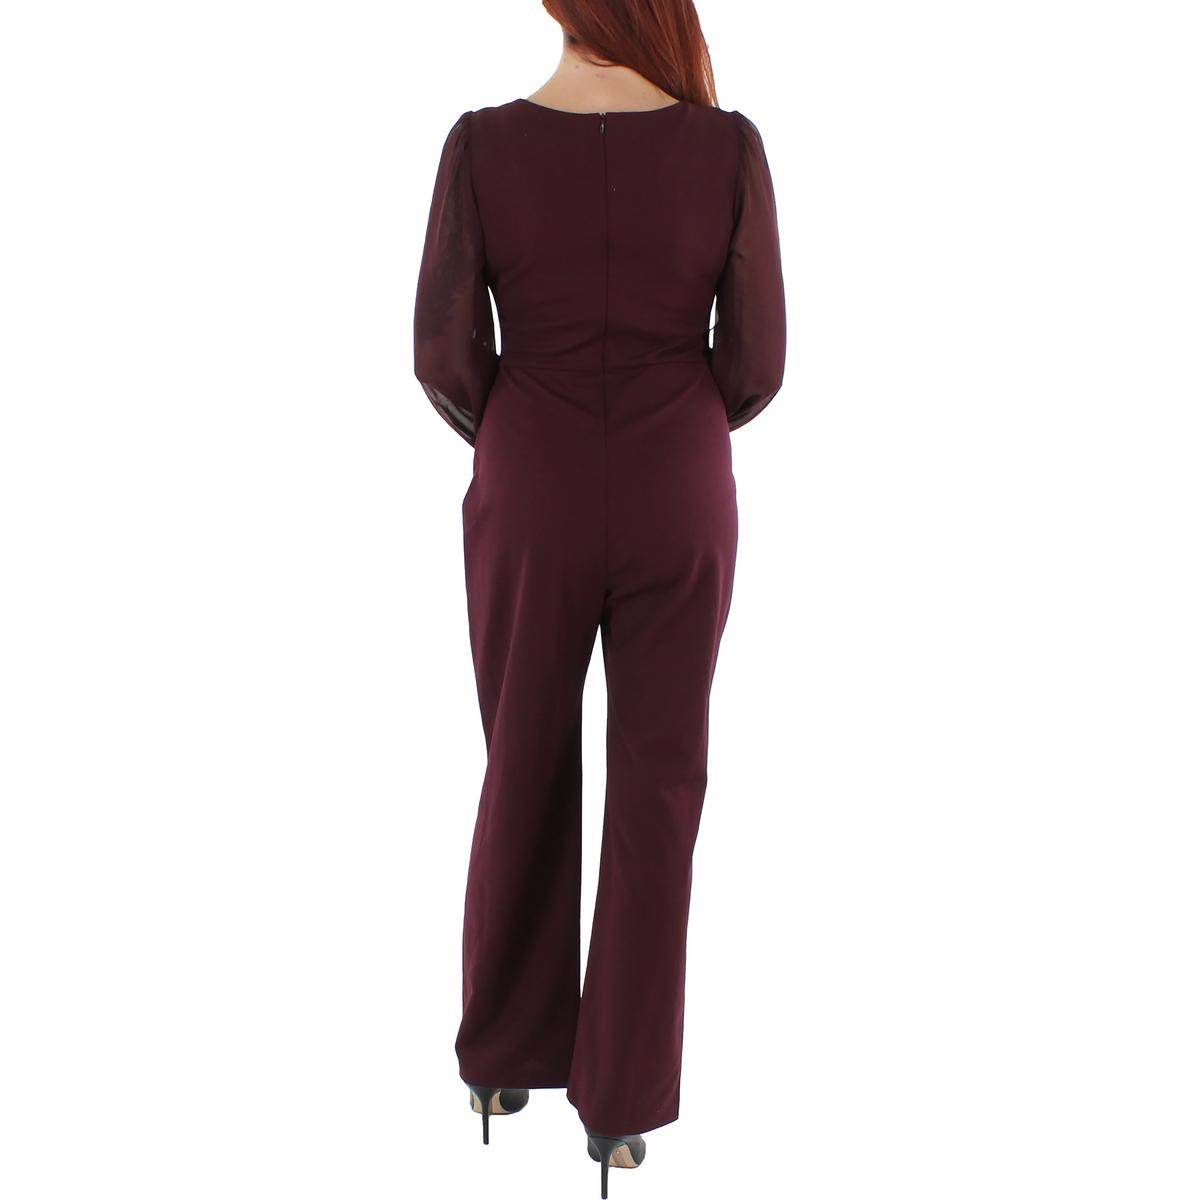 Connected Apparel Womens Sheer Boatneck Jumpsuit